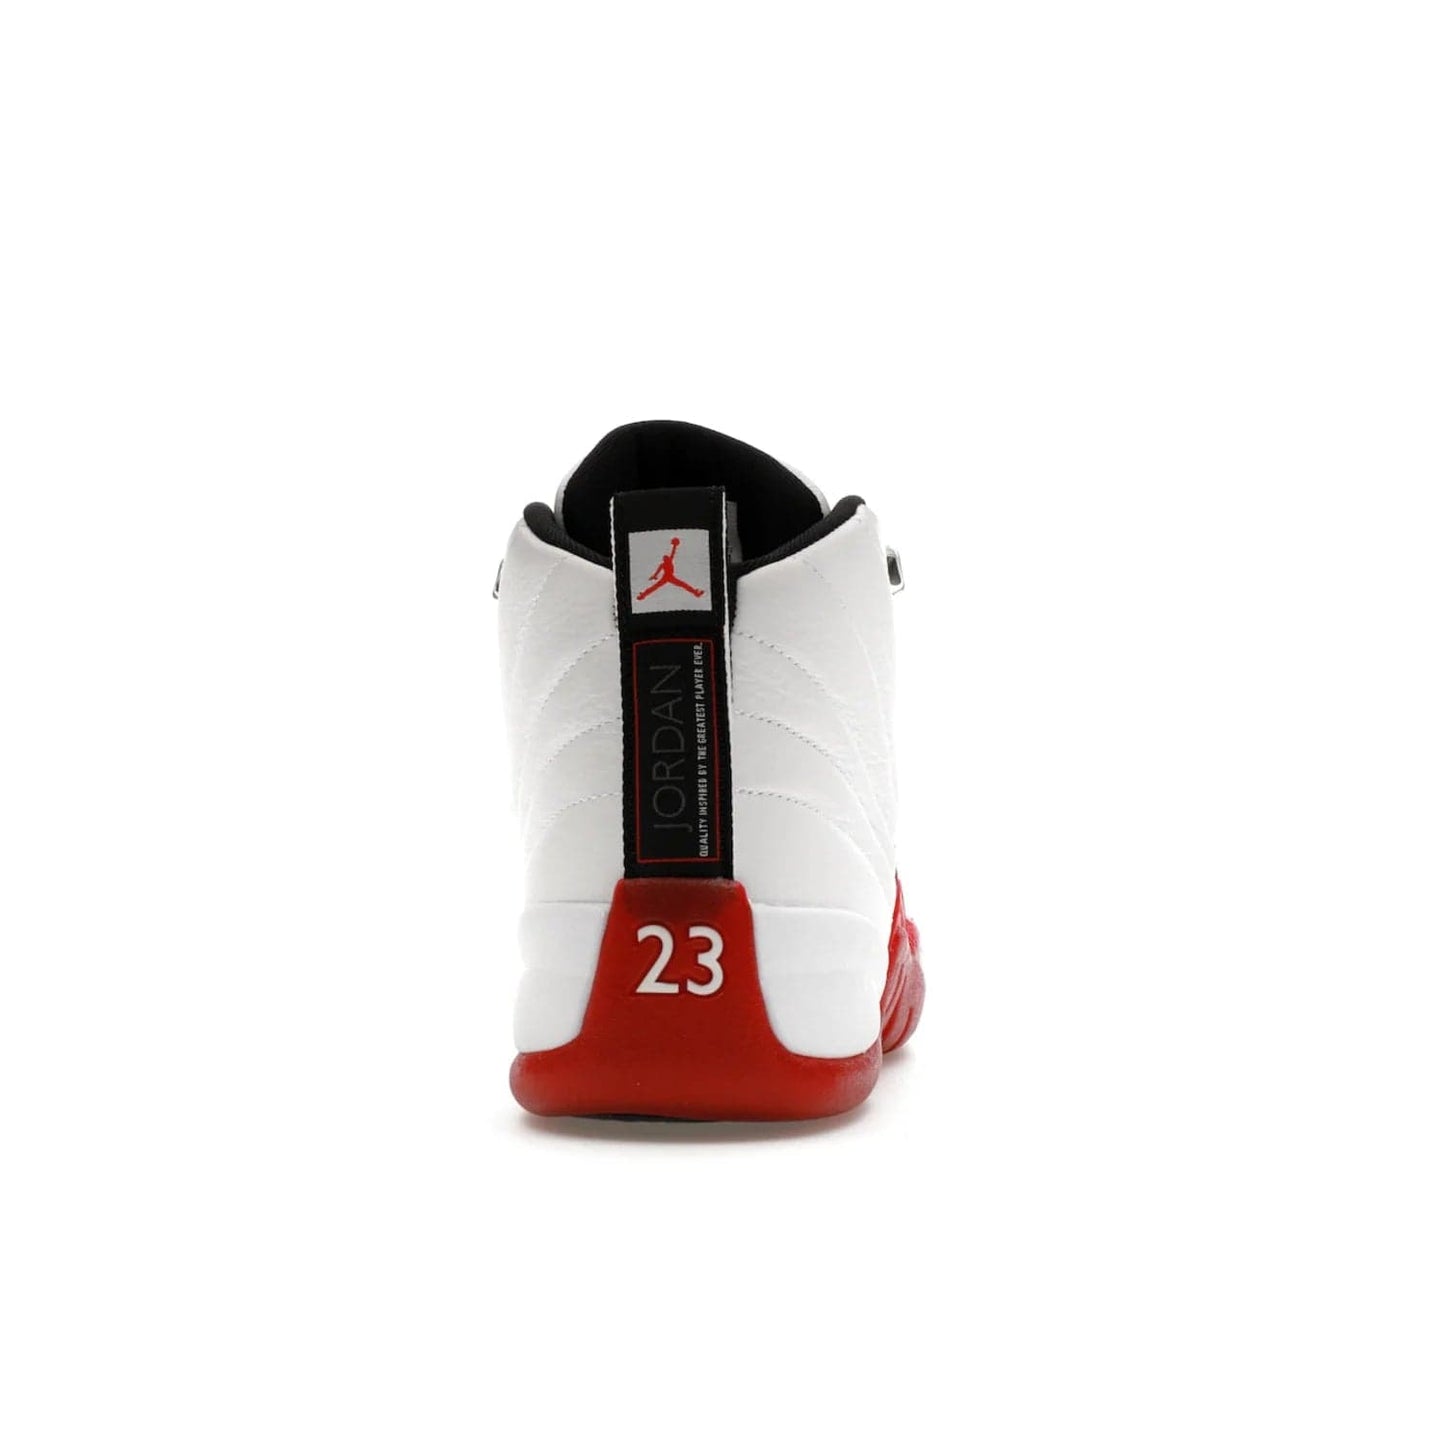 Jordan 12 Retro Cherry (2023) - Image 28 - Only at www.BallersClubKickz.com - Live your sneaker legend with the Jordan 12 Retro Cherry. Iconic pebbled leather mudguards, quilted uppers, and varsity red accents make this 1997 classic a must-have for 2023. Shine on with silver hardware and matching midsoles, and bring it all together for limited-edition style on October 28th. Step into Jordan legacy with the Retro Cherry.